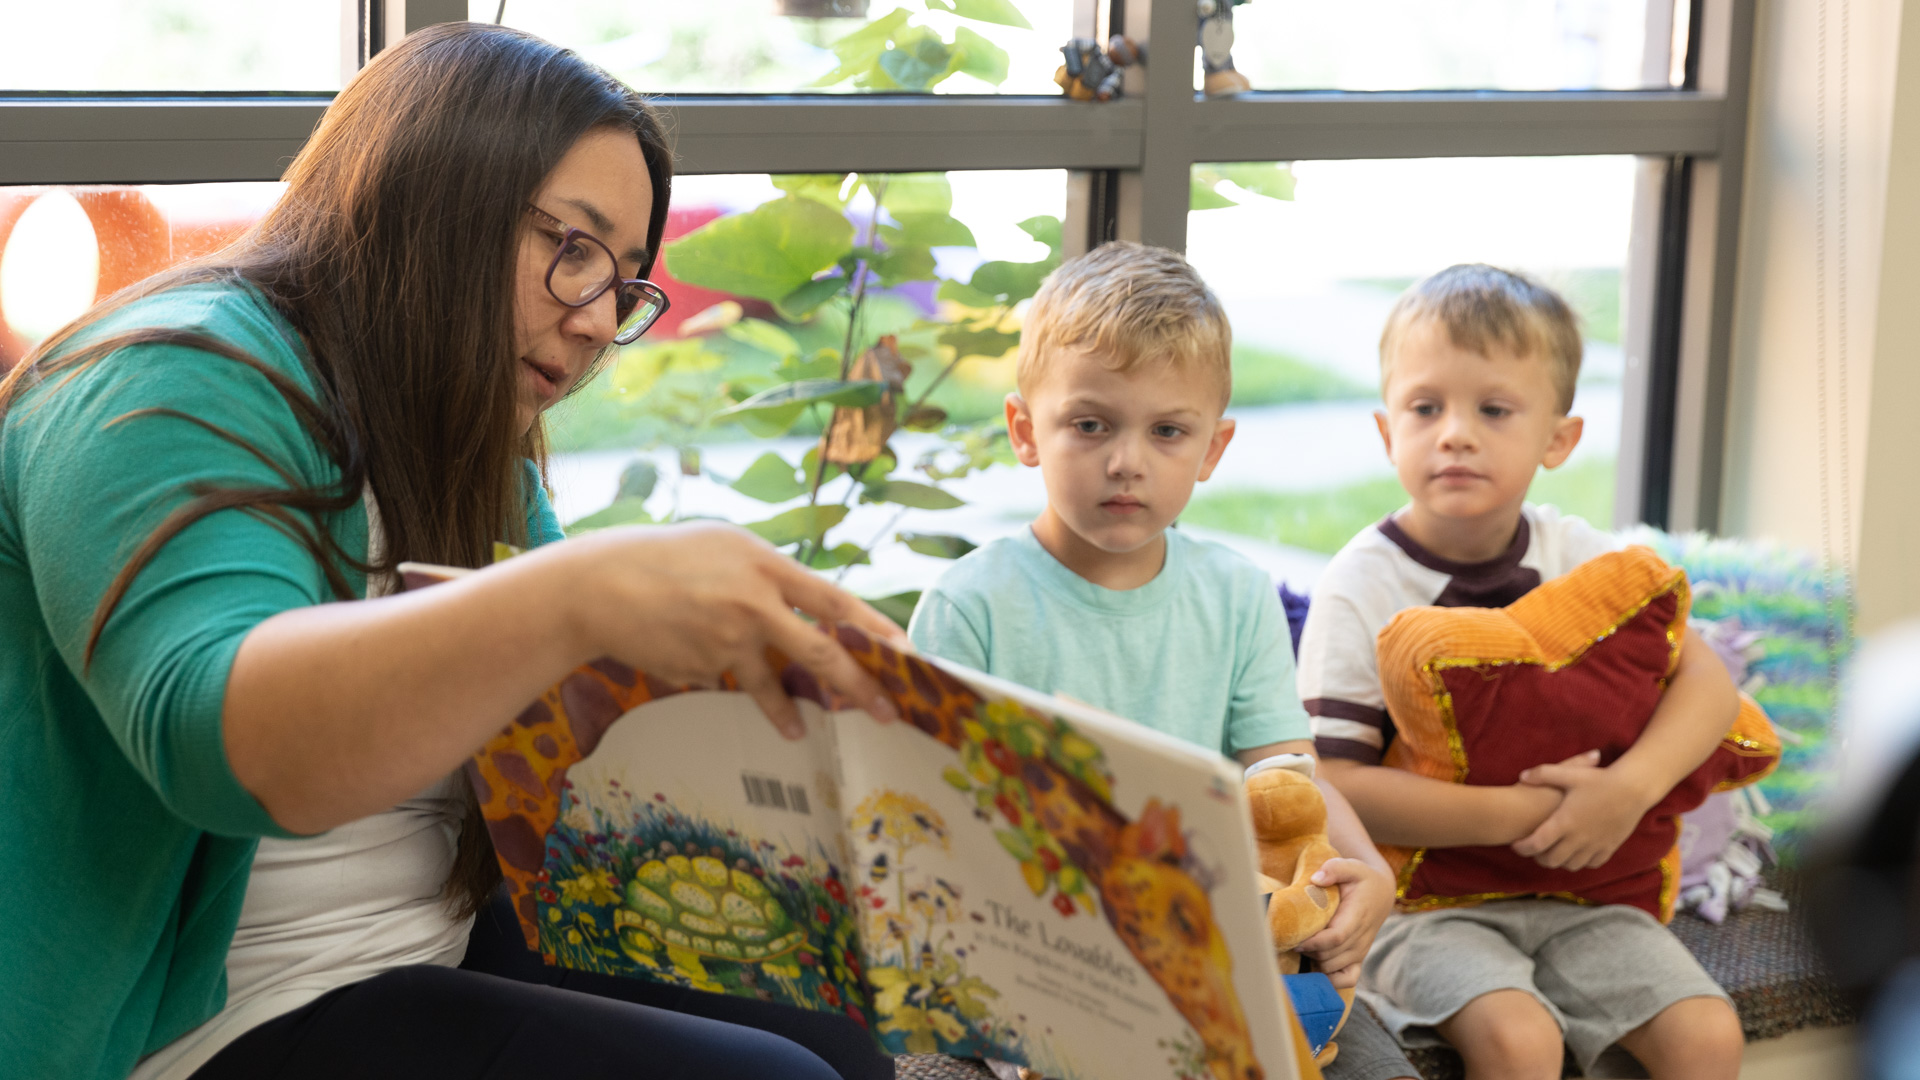 Member of staff reading picture book to two kids